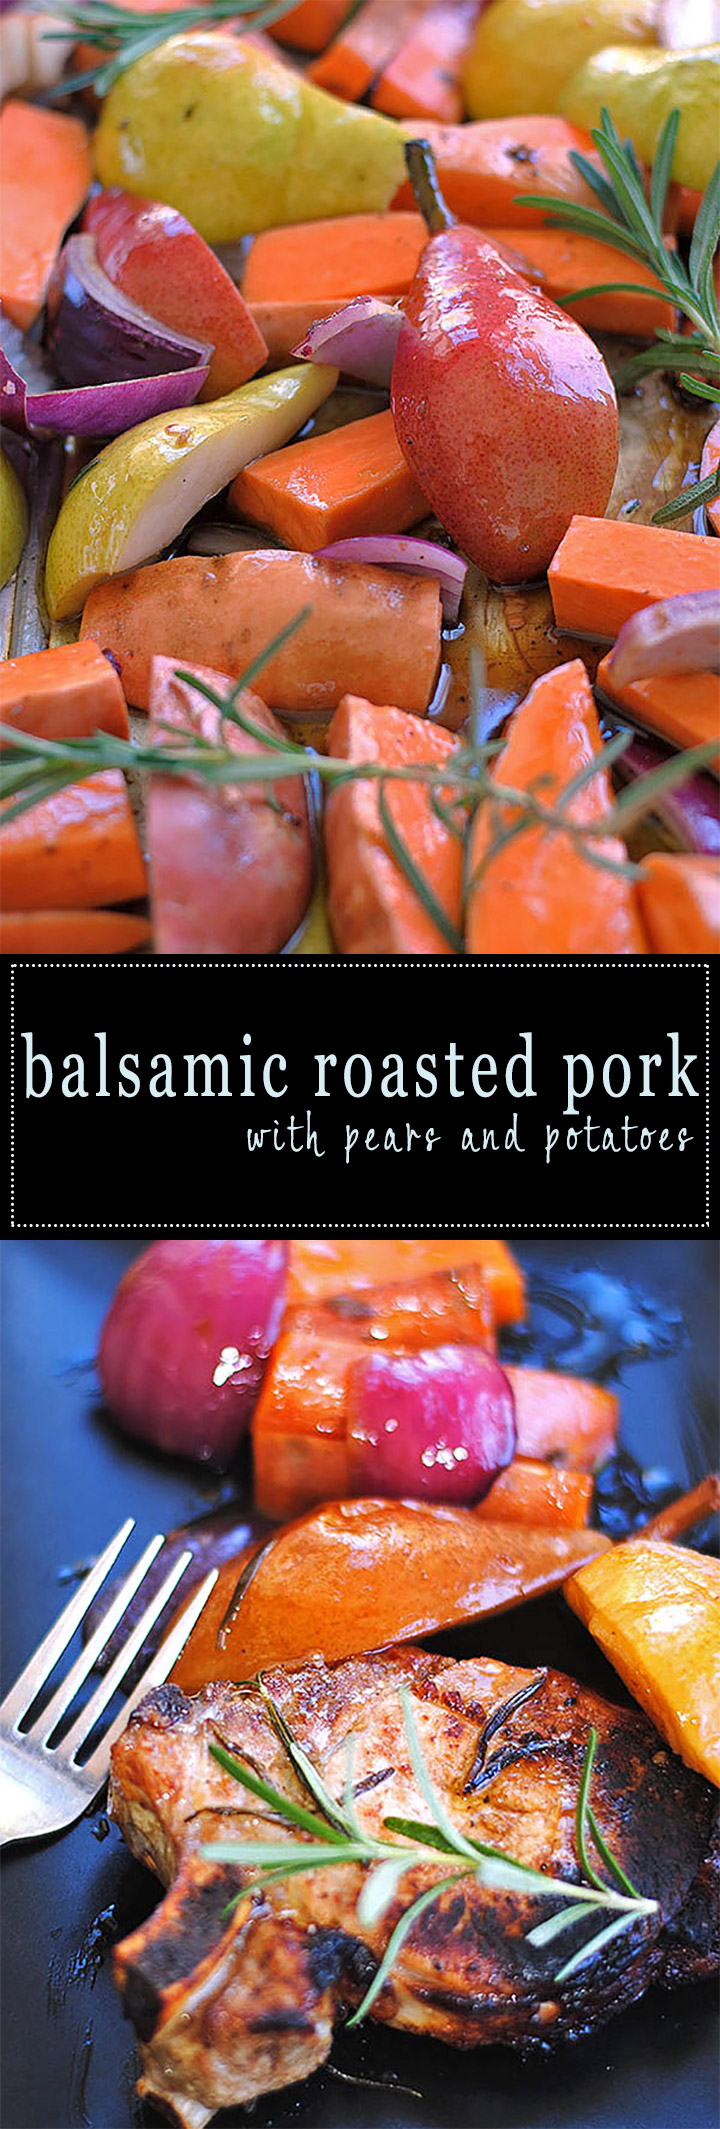 balsamic roasted pork with pears and potatoes